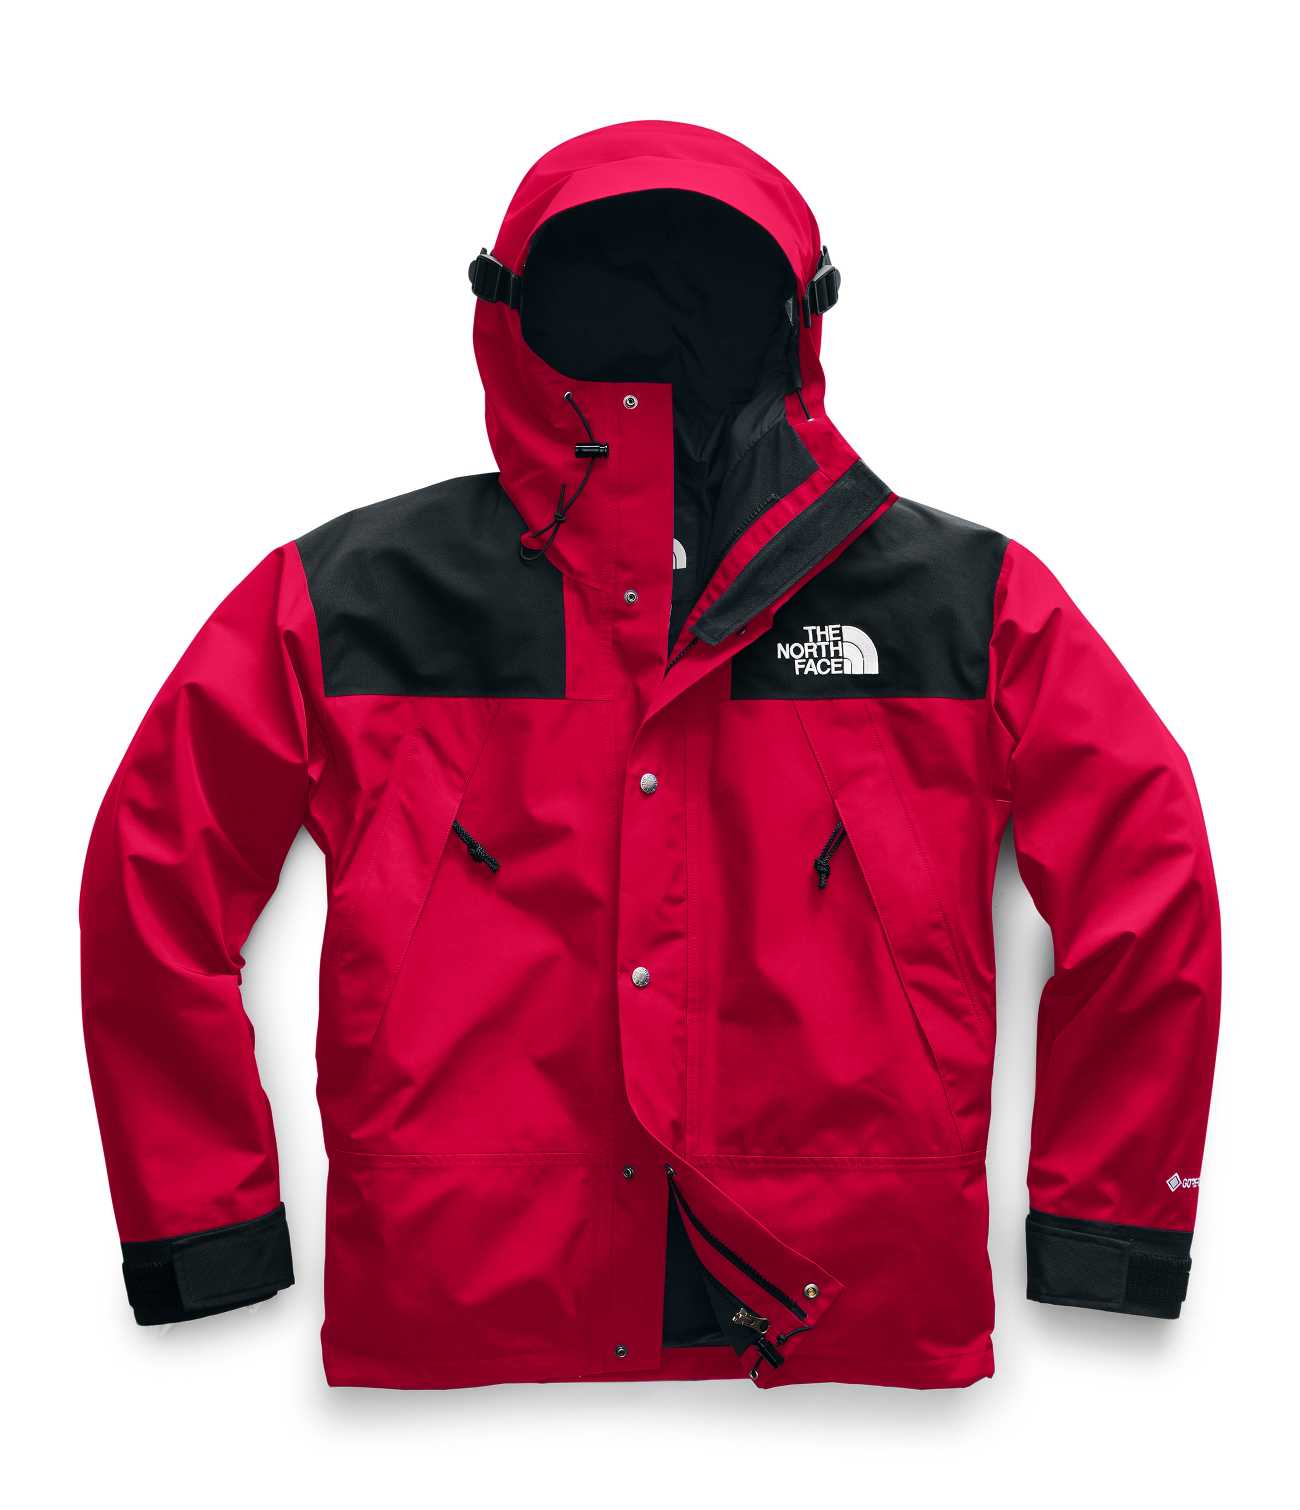 1990 MOUNTAIN JACKET GORE-TEX | The North Face | The North Face